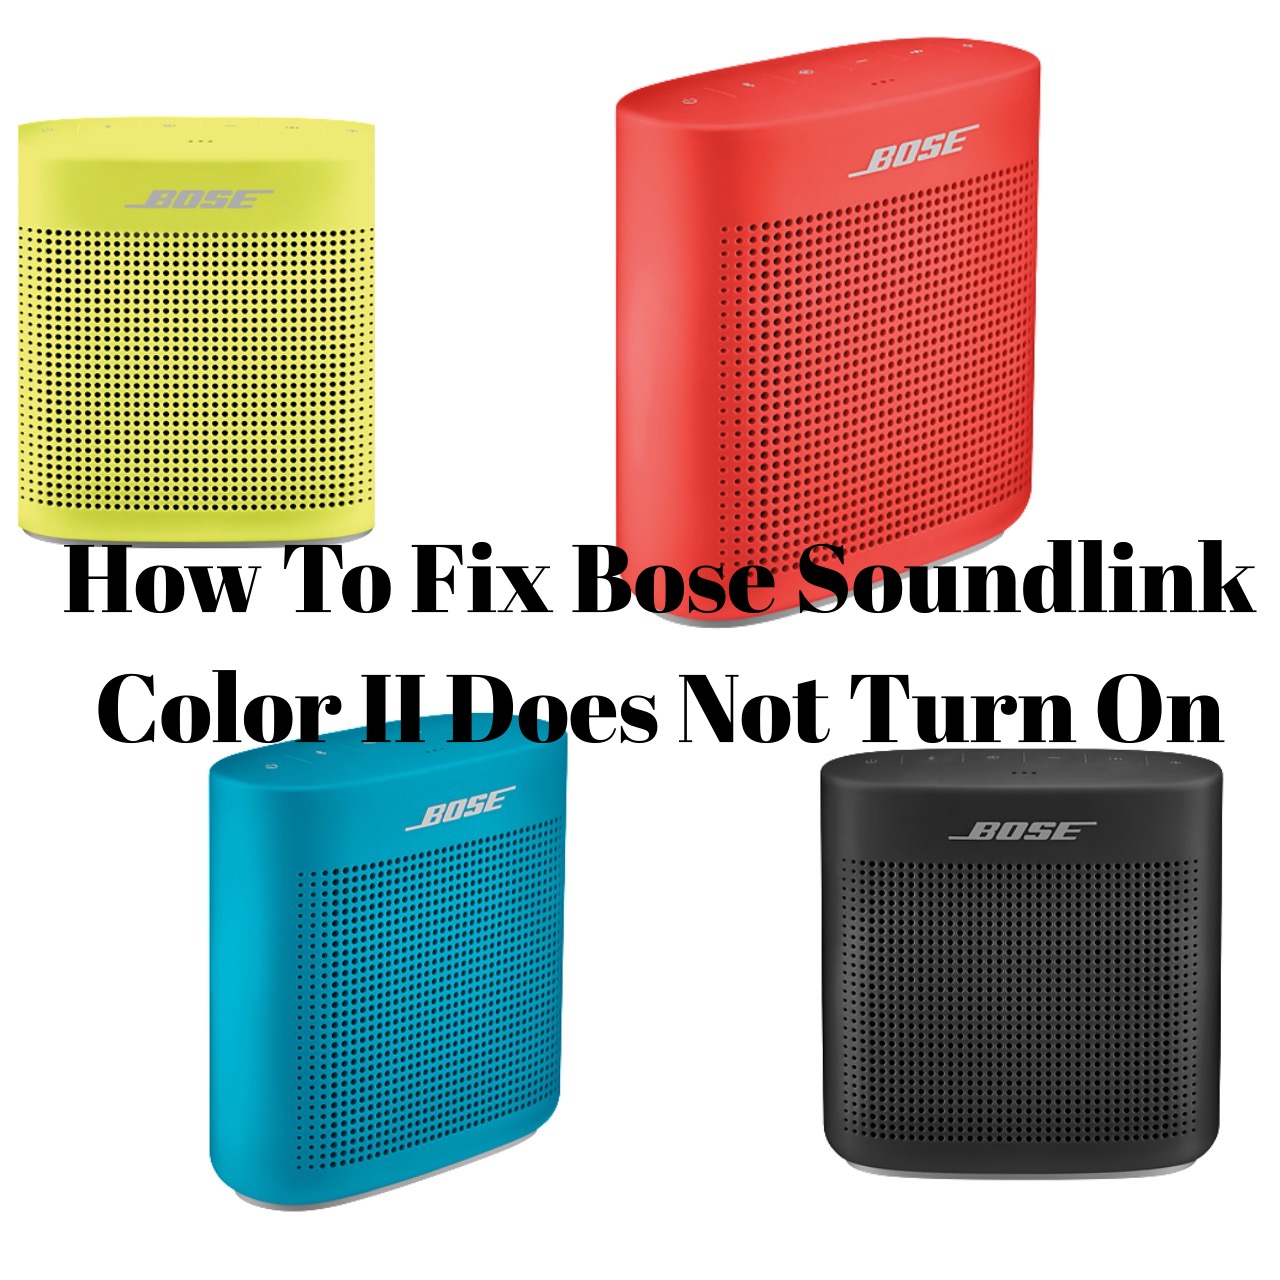 How To Fix Bose Does Not Turn On – The Droid Guy